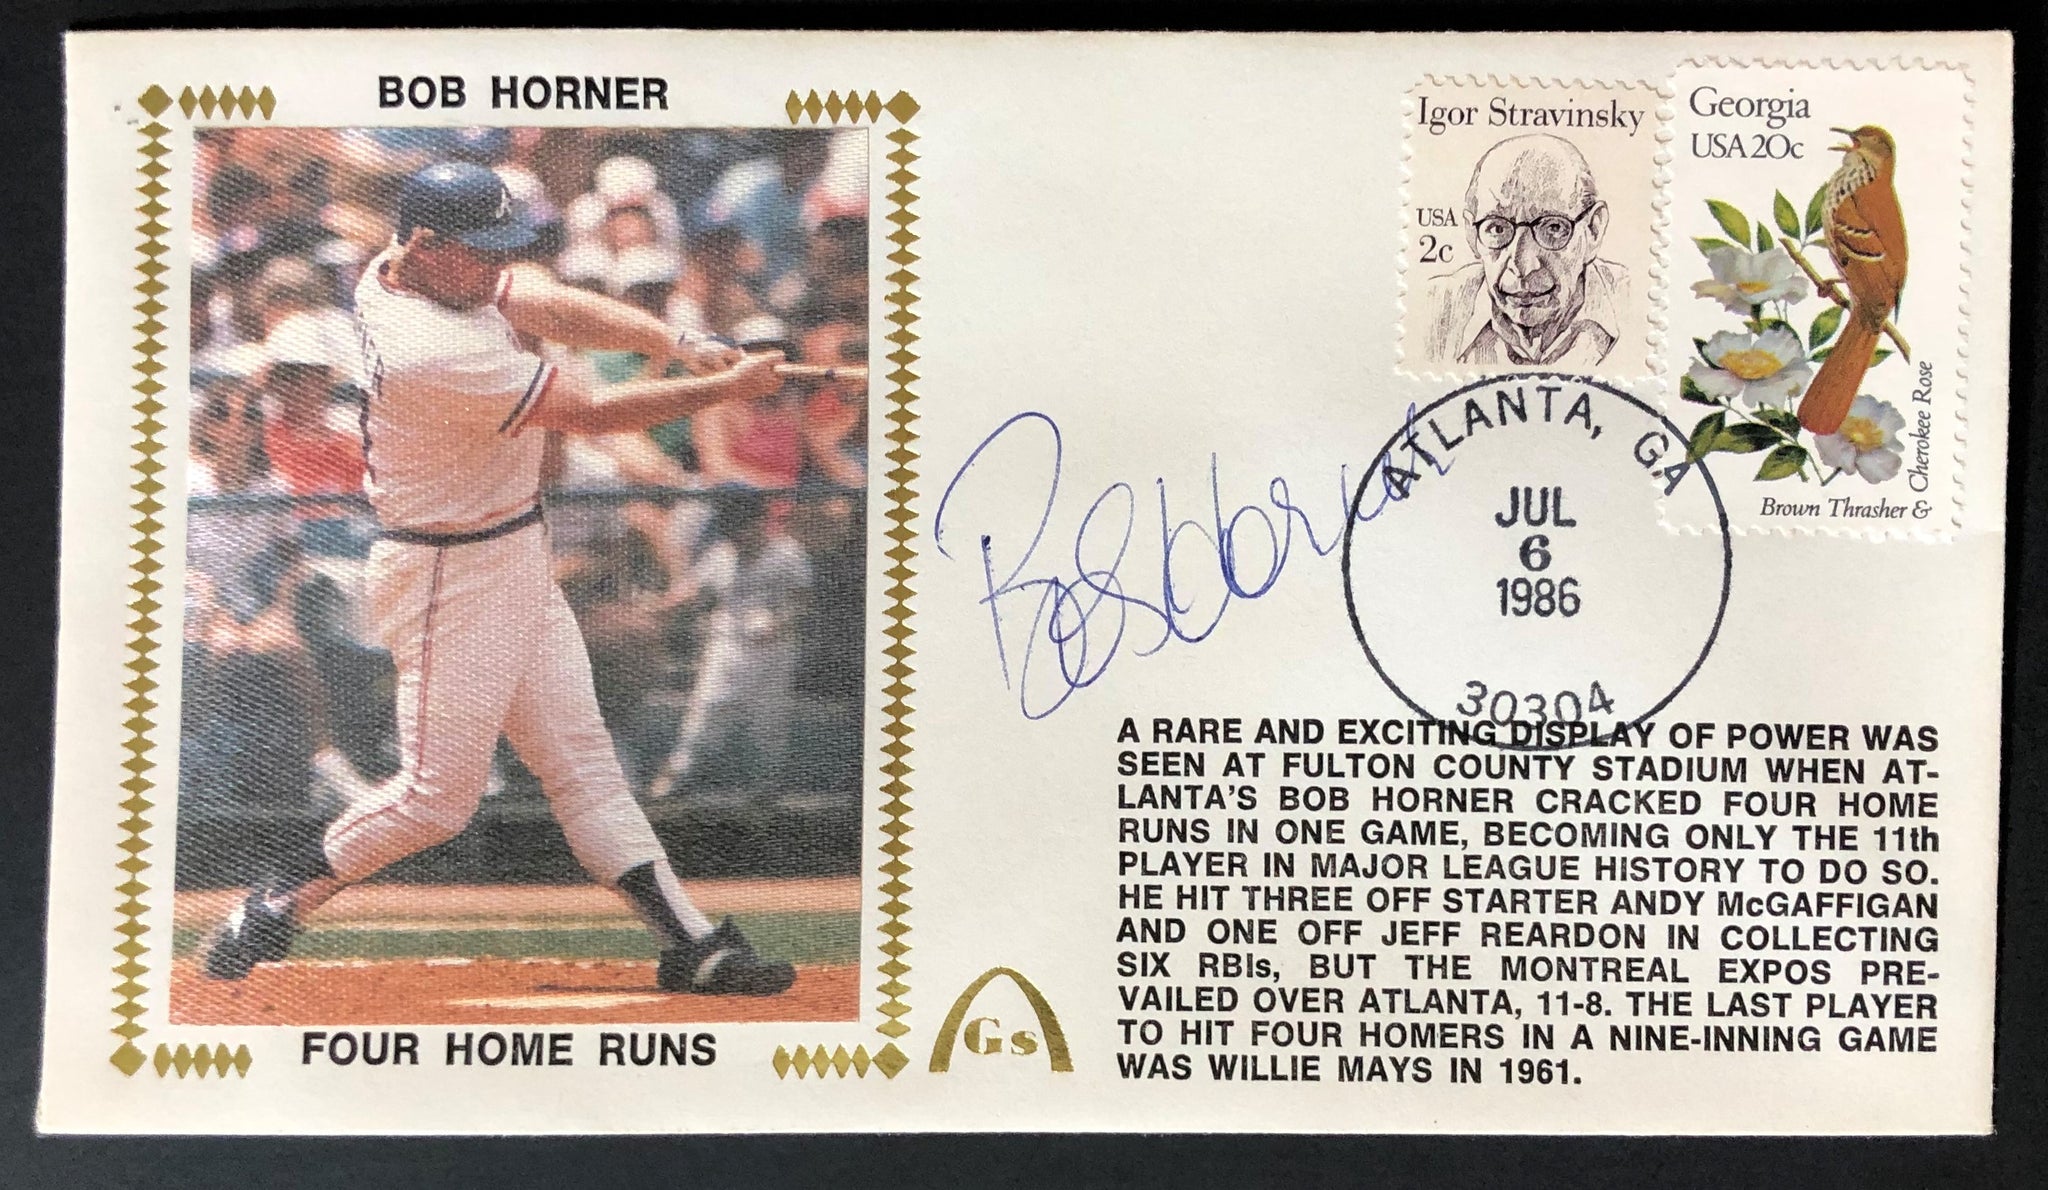 Bob Horner - 4 home runs in one game on July 6, 1986